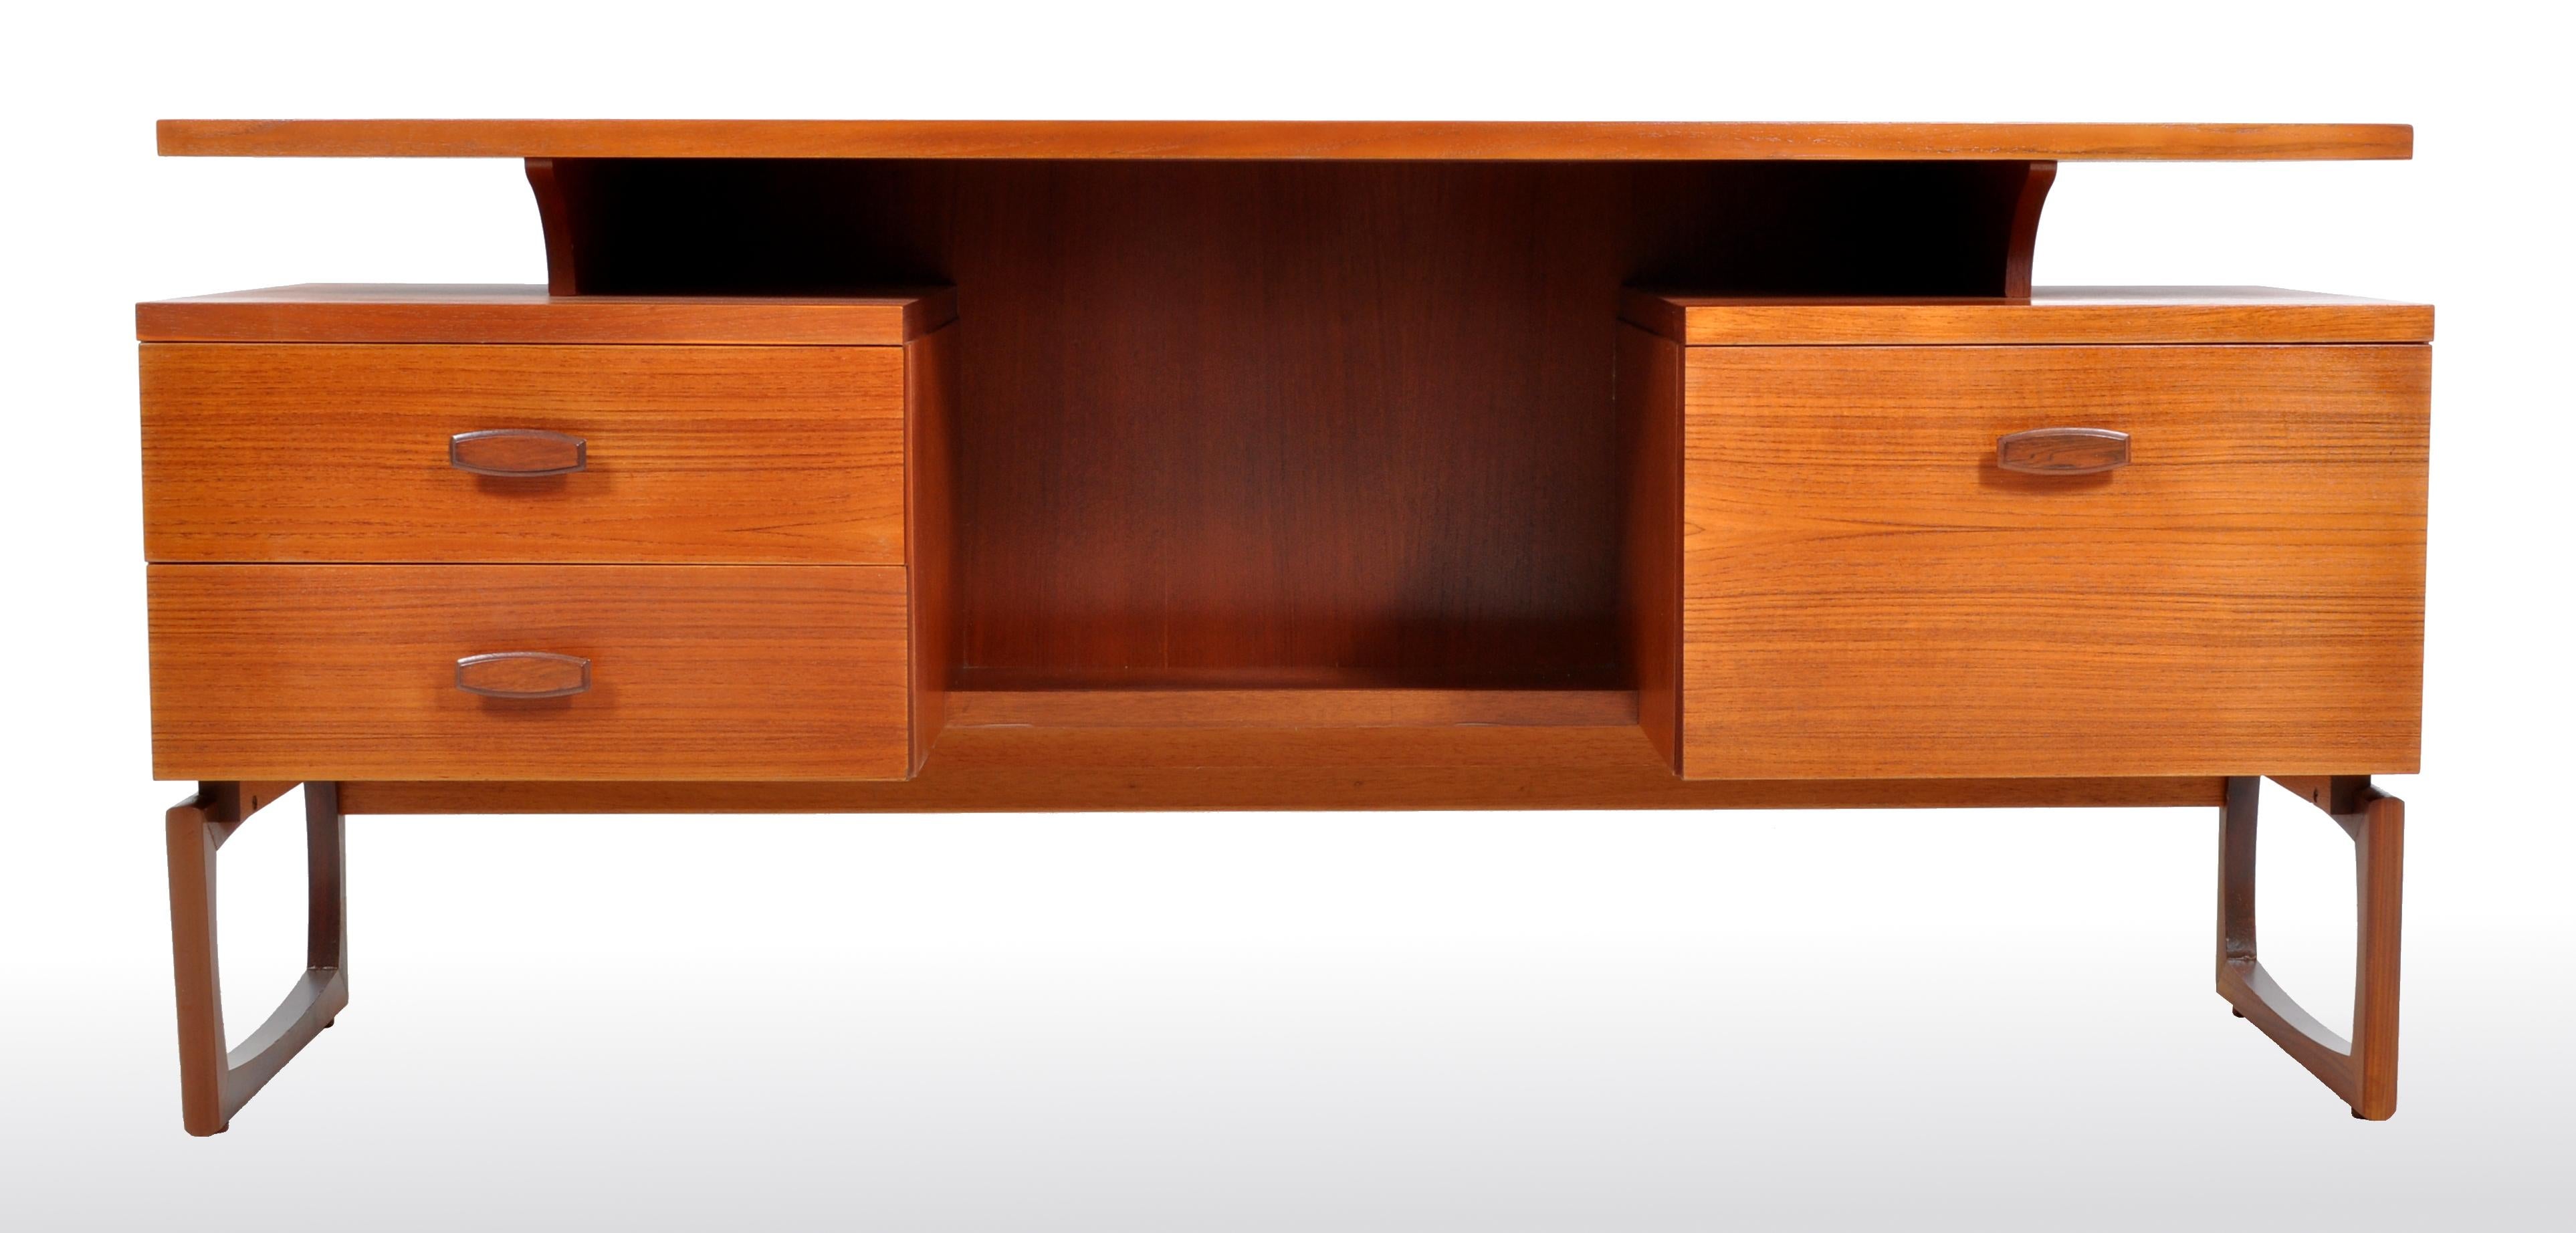 Mid-Century Modern Danish style teak floating top desk by Ib Kofod-Larsen for G Plan, 1960s. The desk having a curvilinear floating top writing surface above twin pedestals, to the left a bank of two drawers and to the right a single cupboard. The